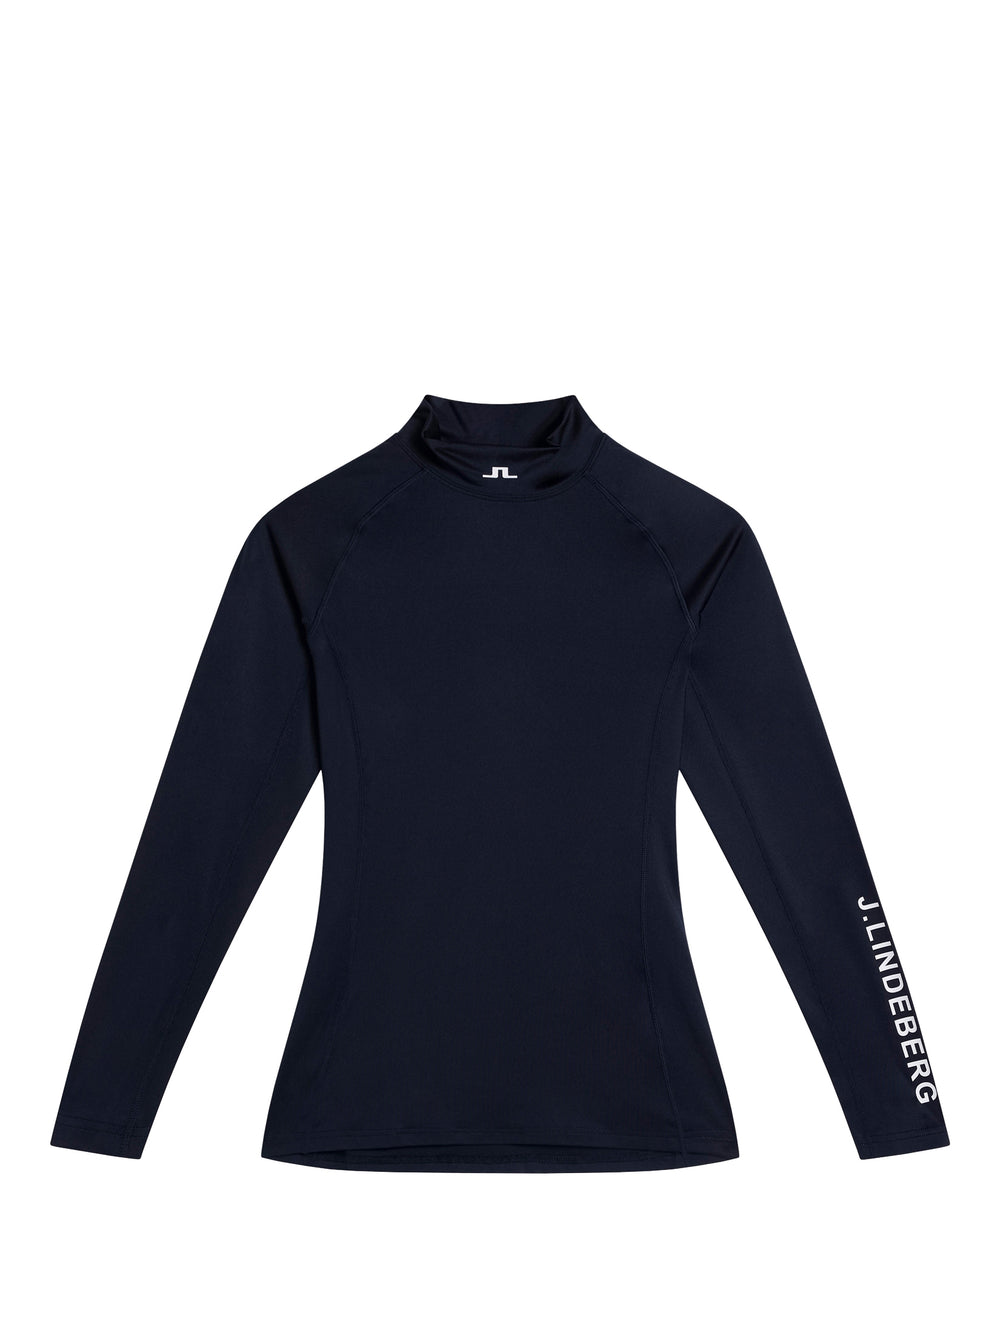 Women's Athleisure Base & Mid Layers - J.Lindeberg